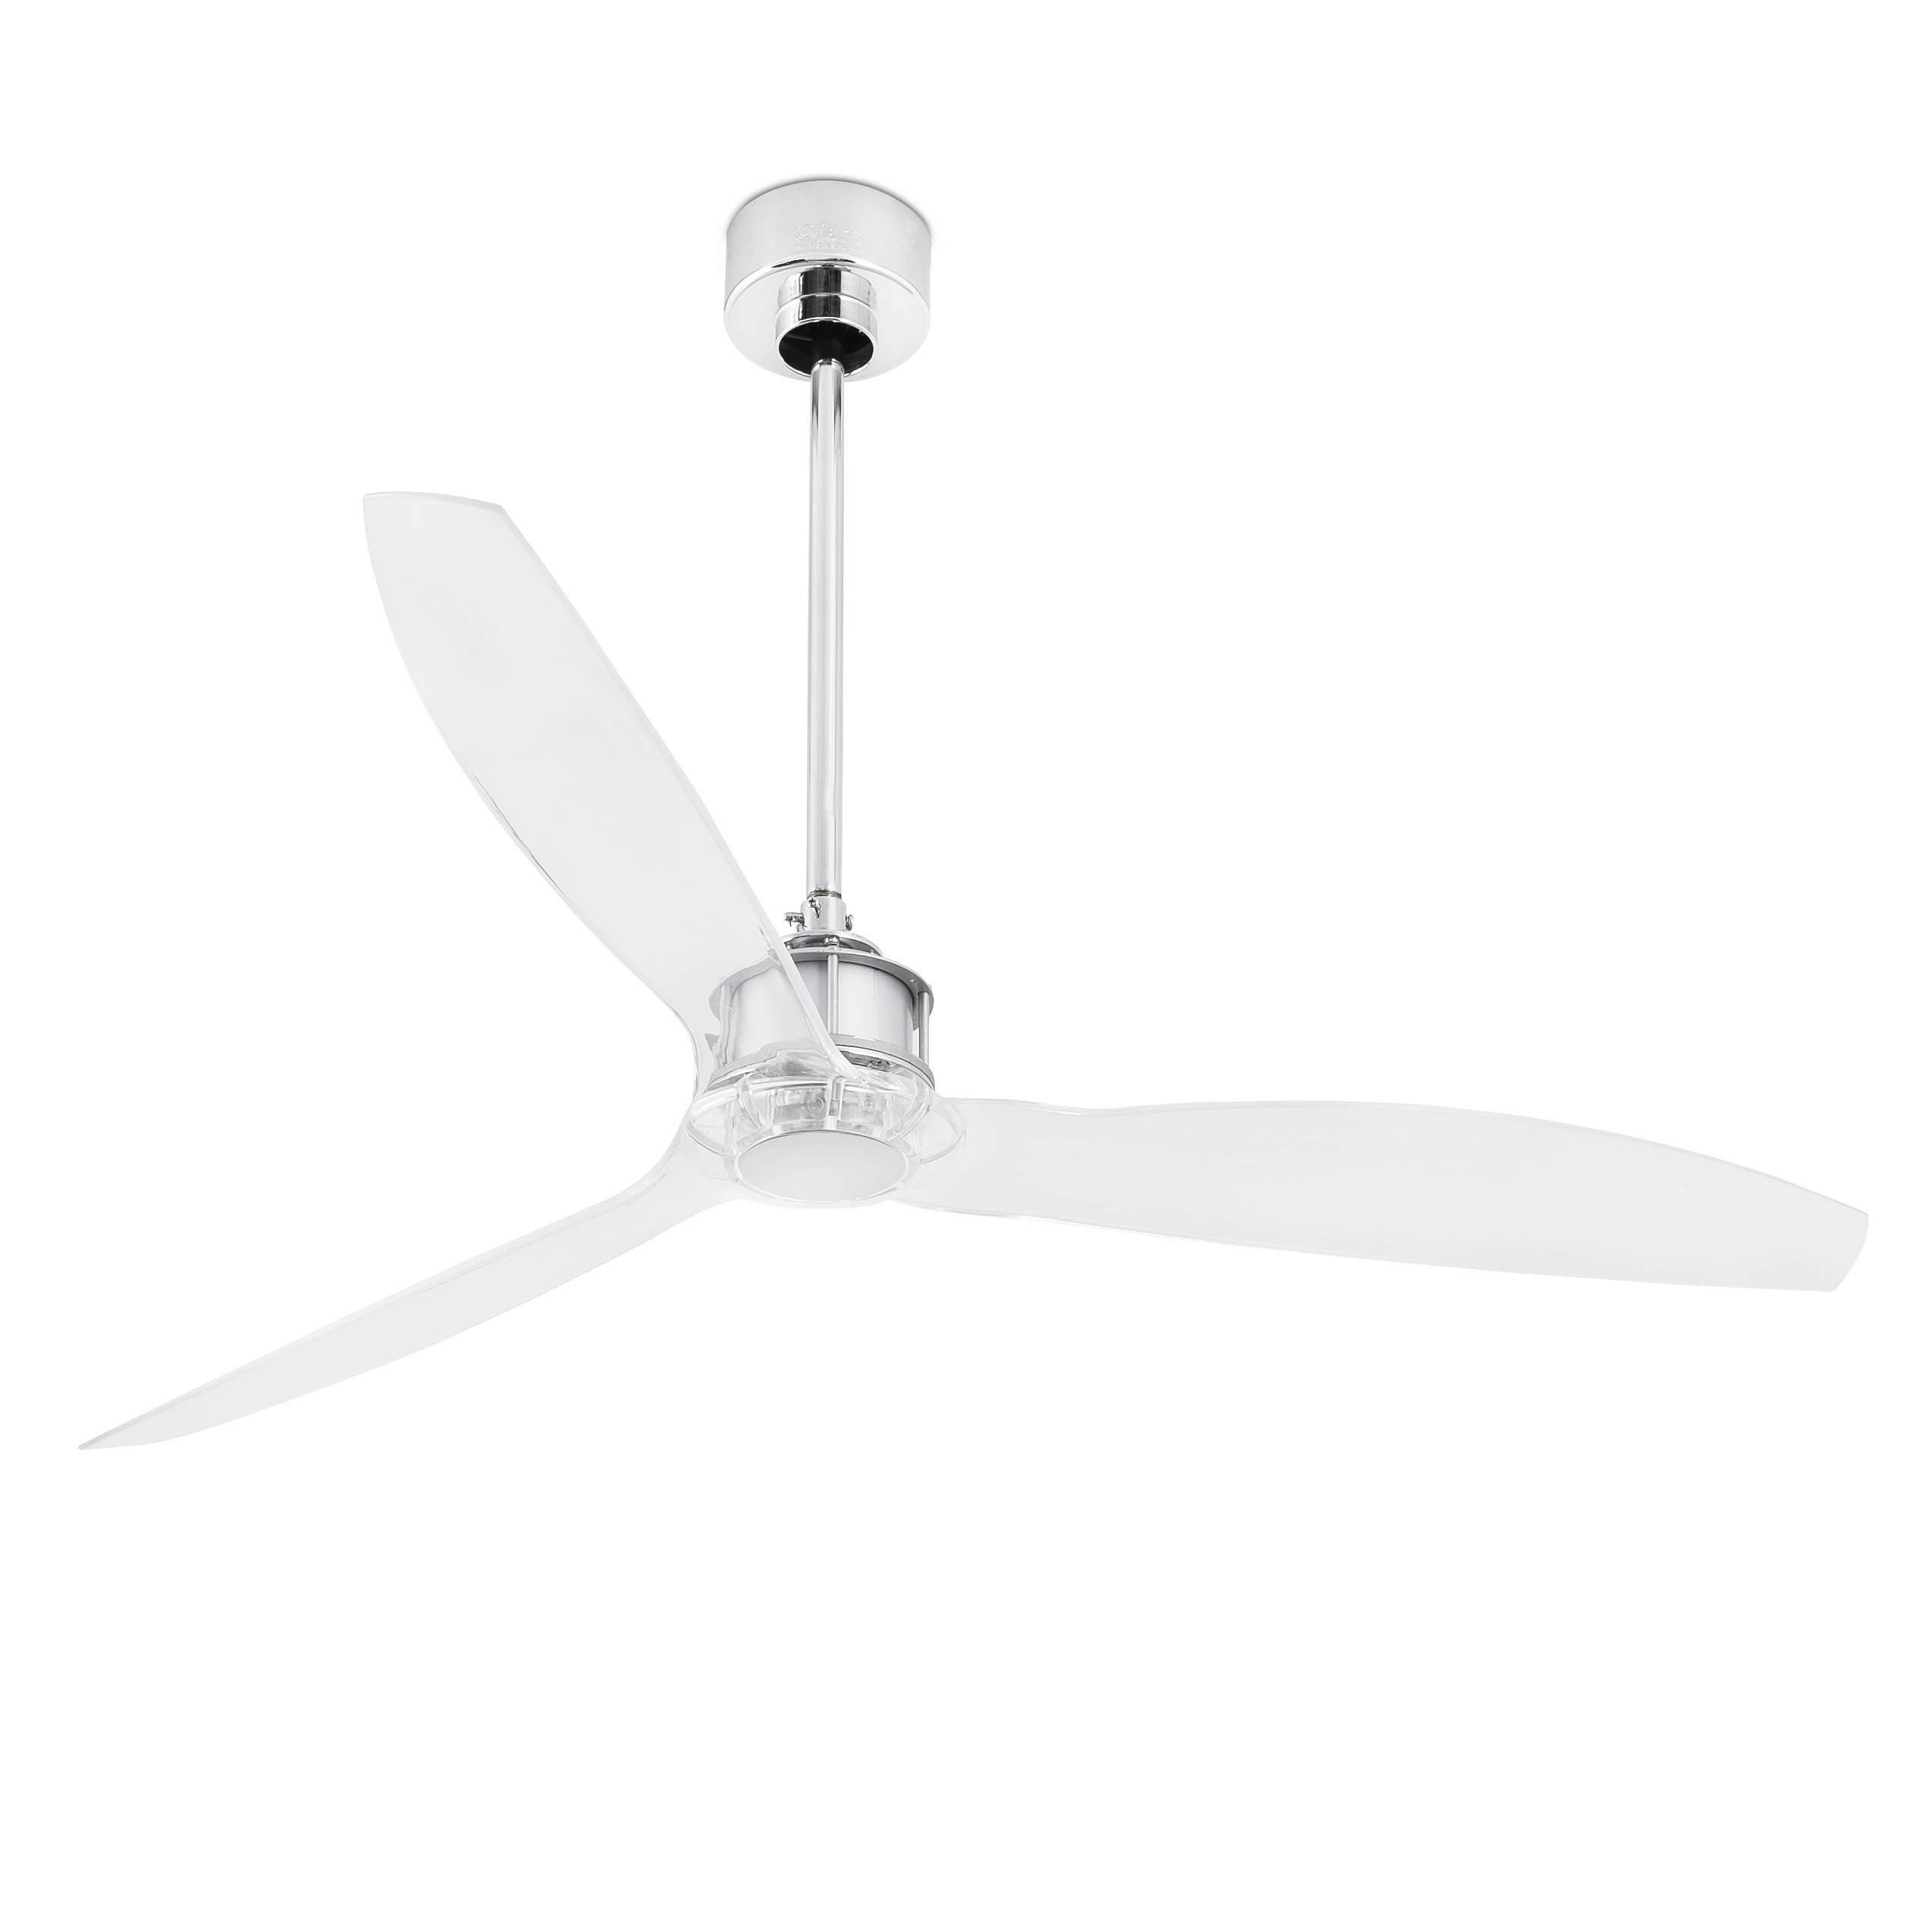 Just Medium Ceiling Fan Chrome Clear Optional LED Light Sold Separately - image 1